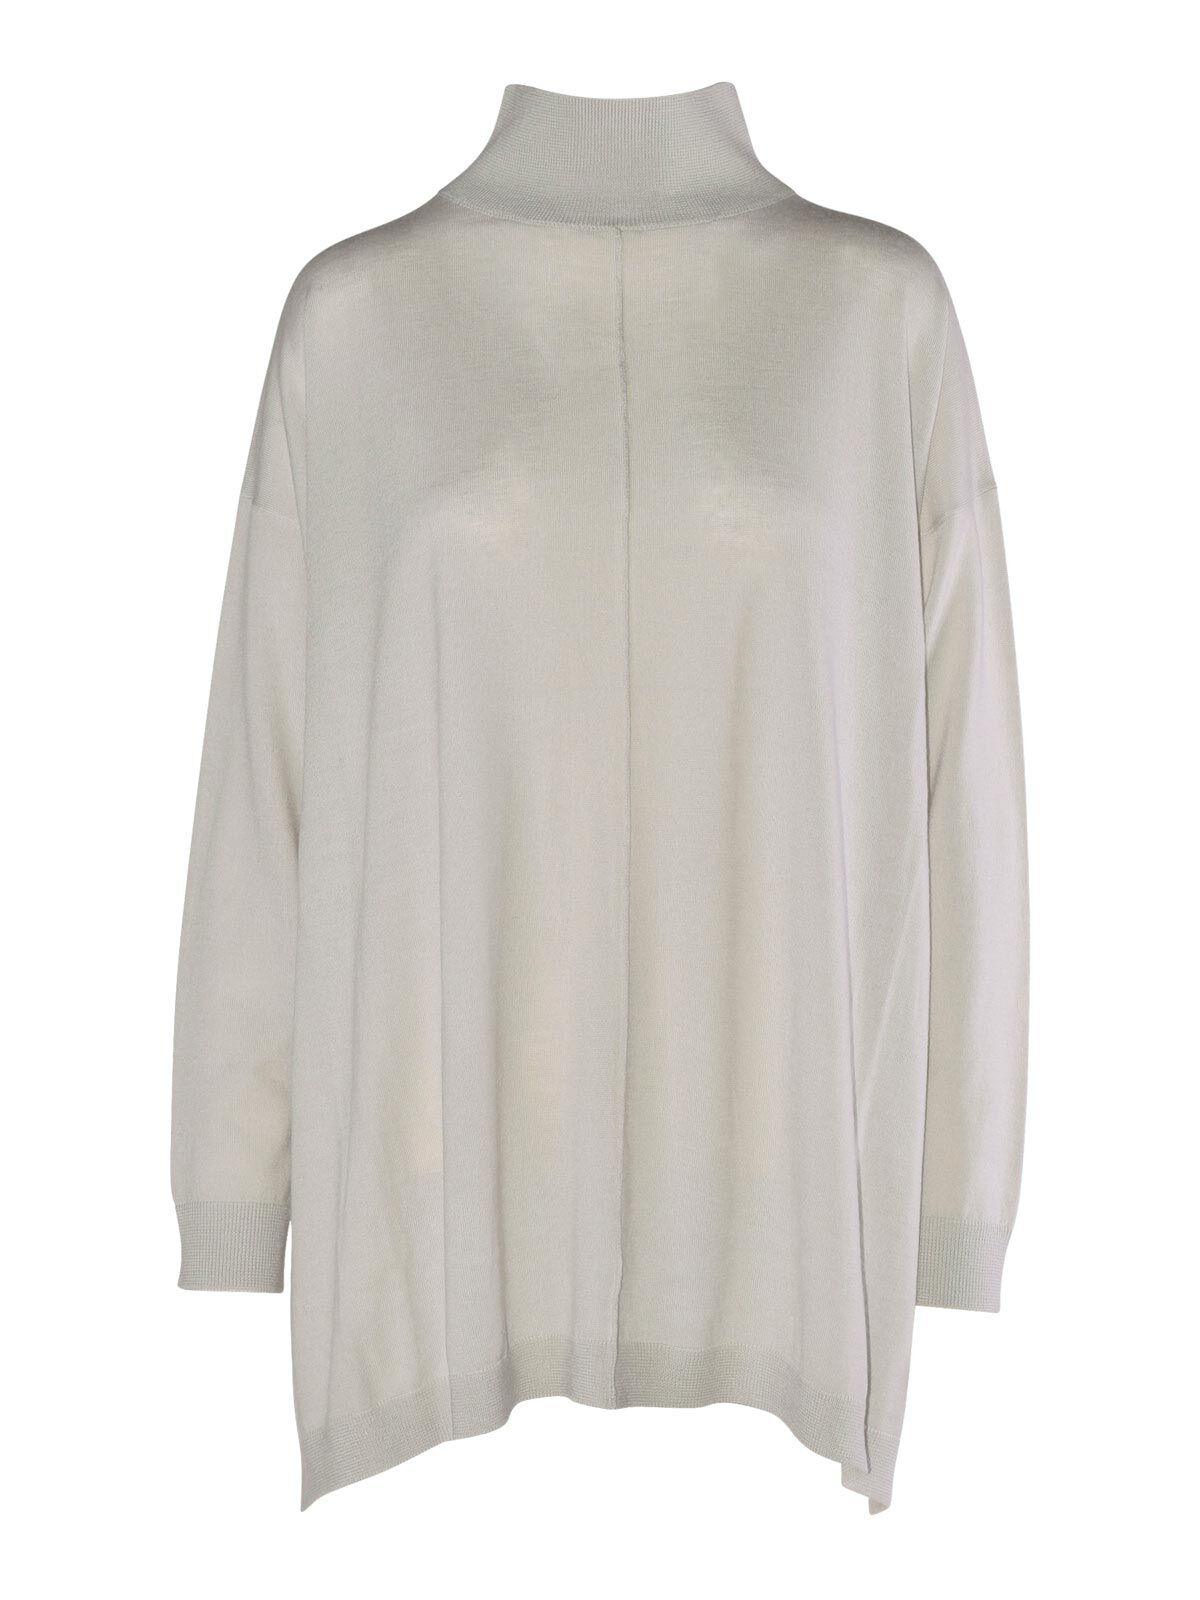 Cream polo neck jumper. 100% Merino with ZQ certification - Yarn is spun in Italy - Refined jersey knit